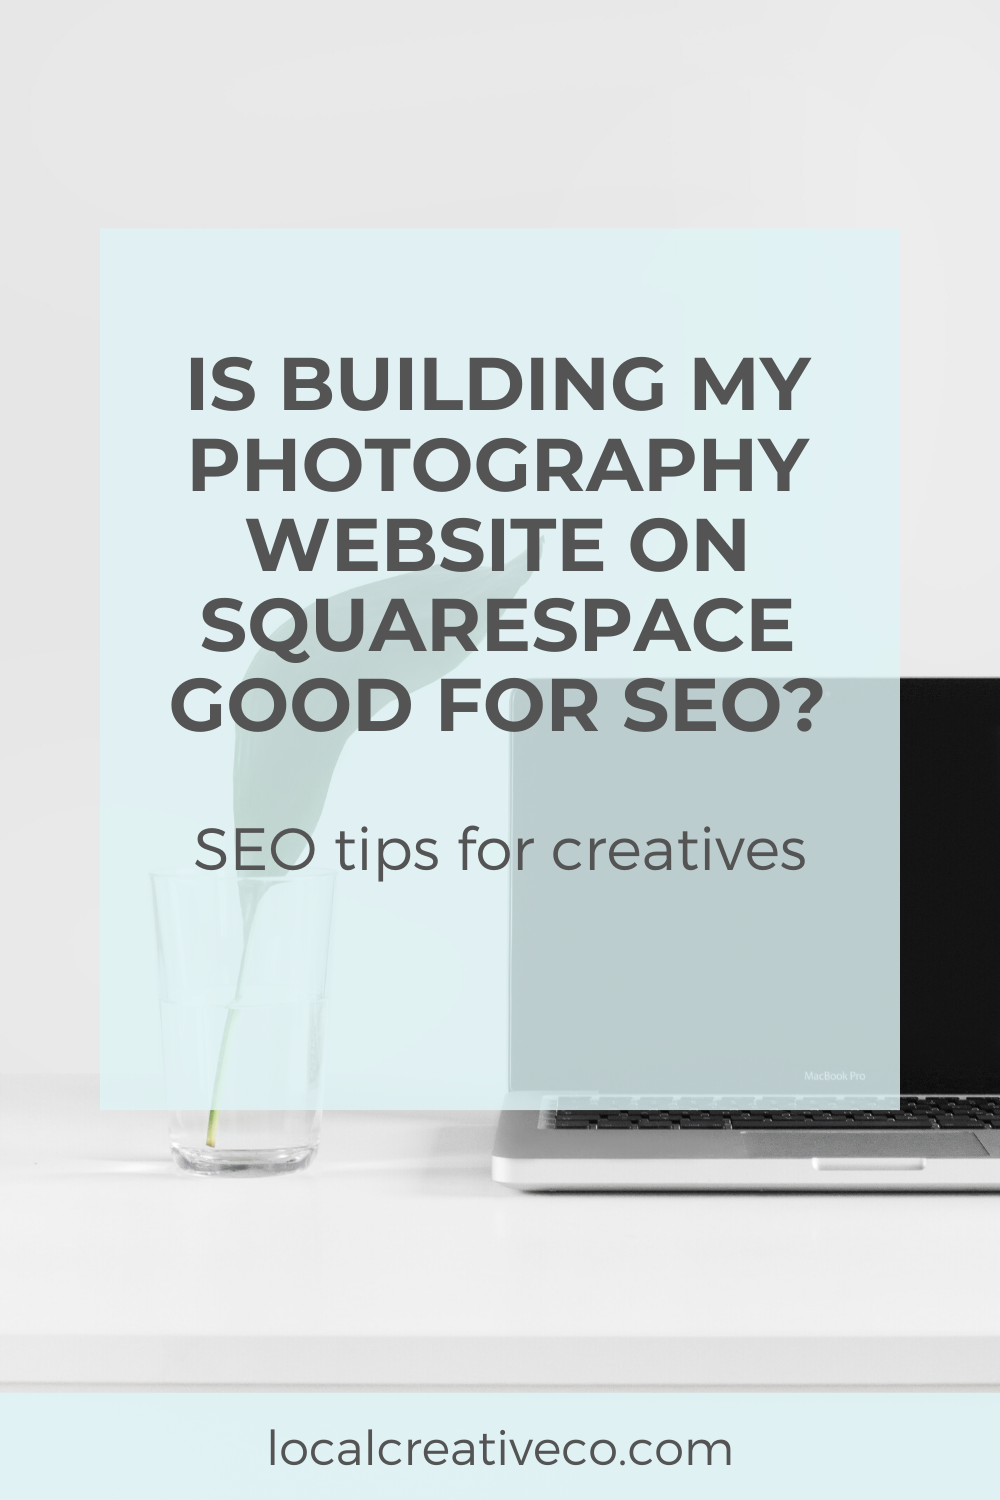 Is Squarespace Good to Build my Photography Business Website for SEO?